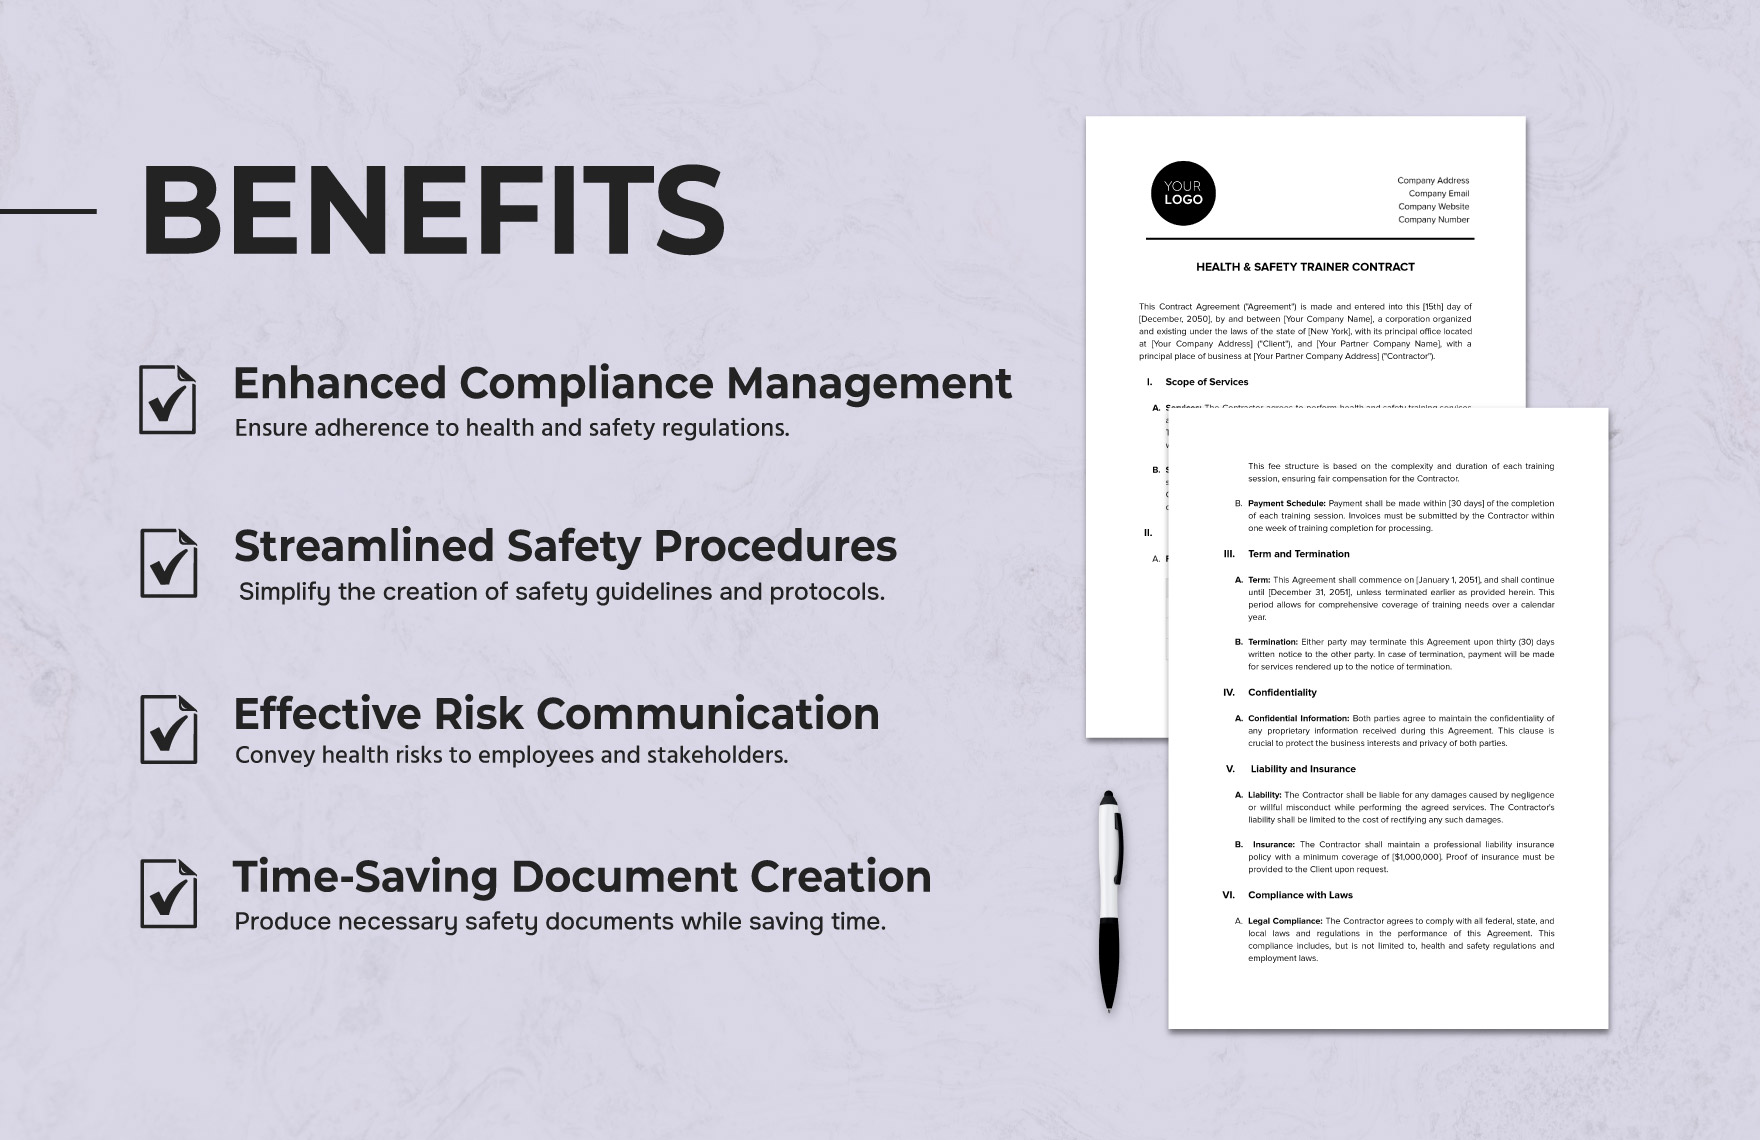 Health & Safety Trainer Contract Template